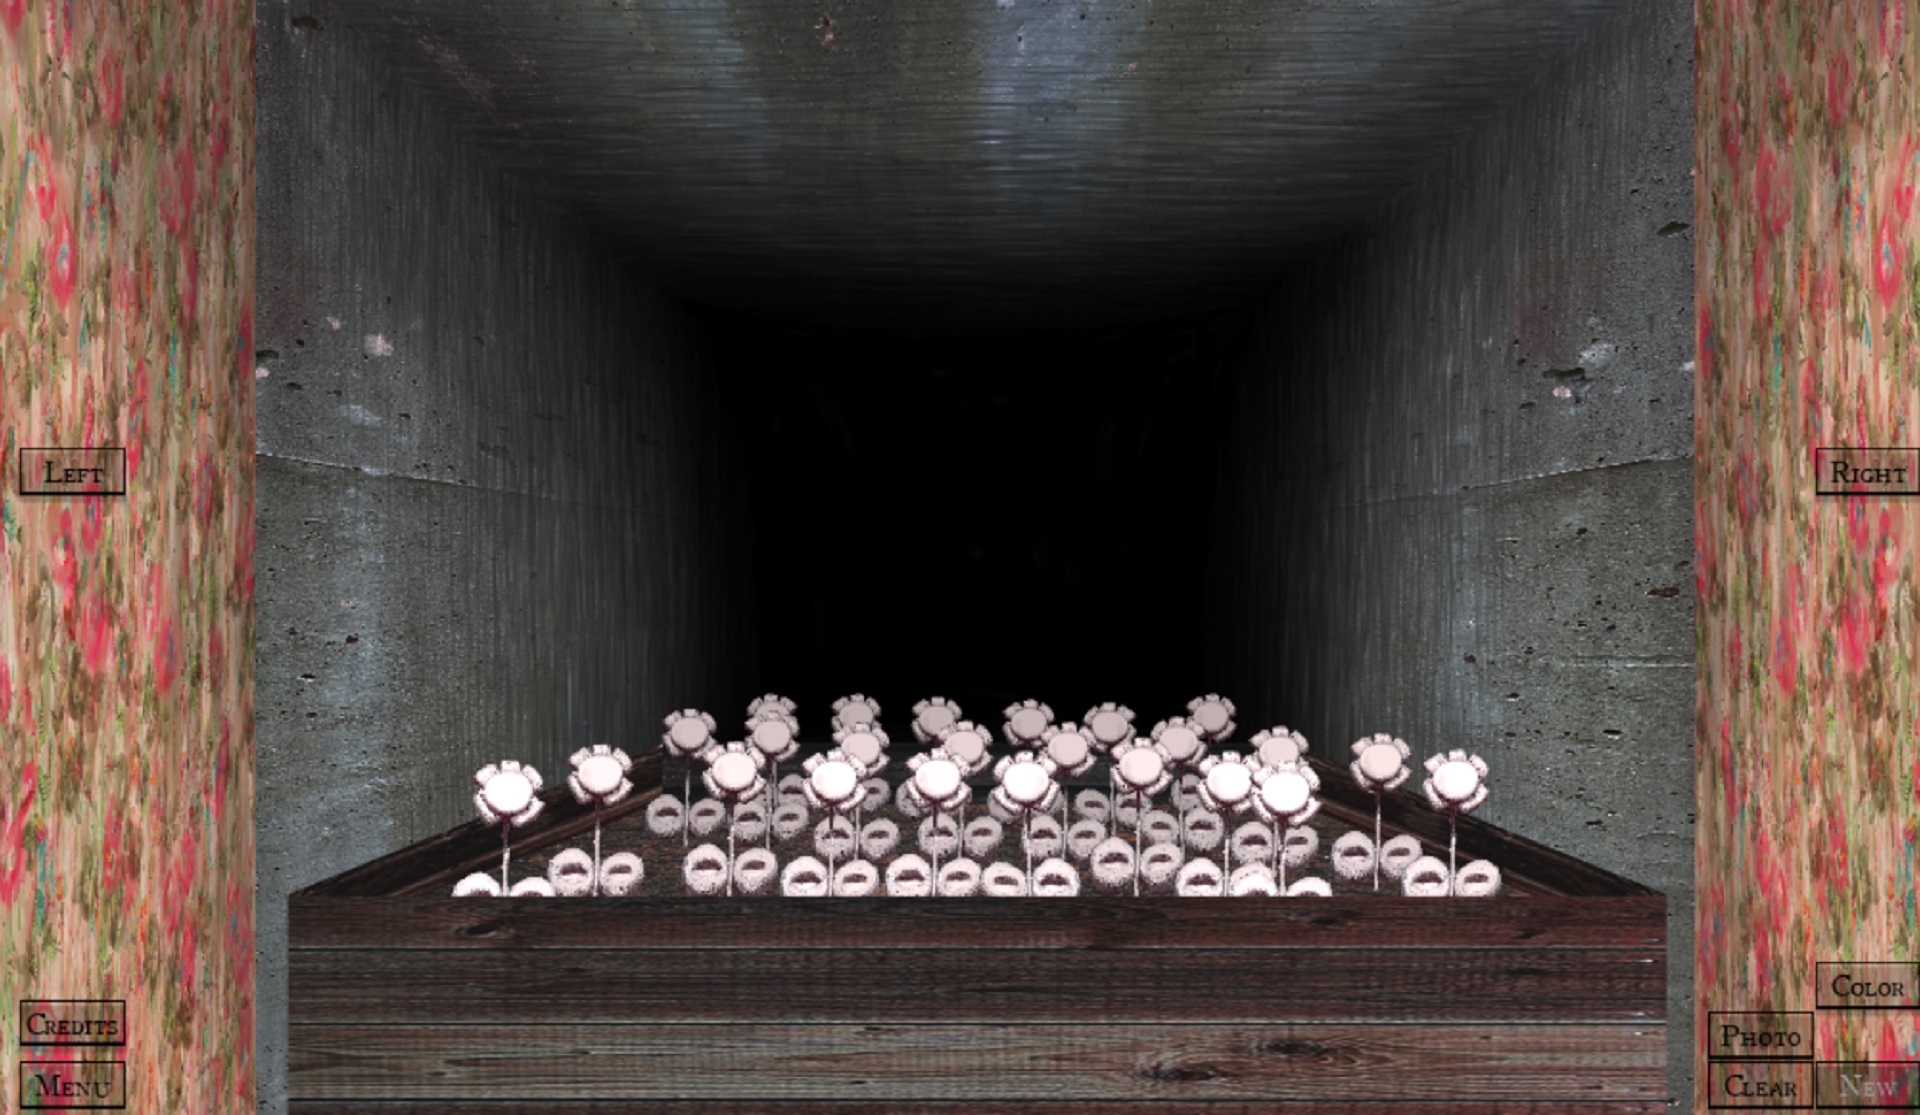 Springtime in the Flower Chamber - a bed of gray flowers sit in a flower box in a concrete room